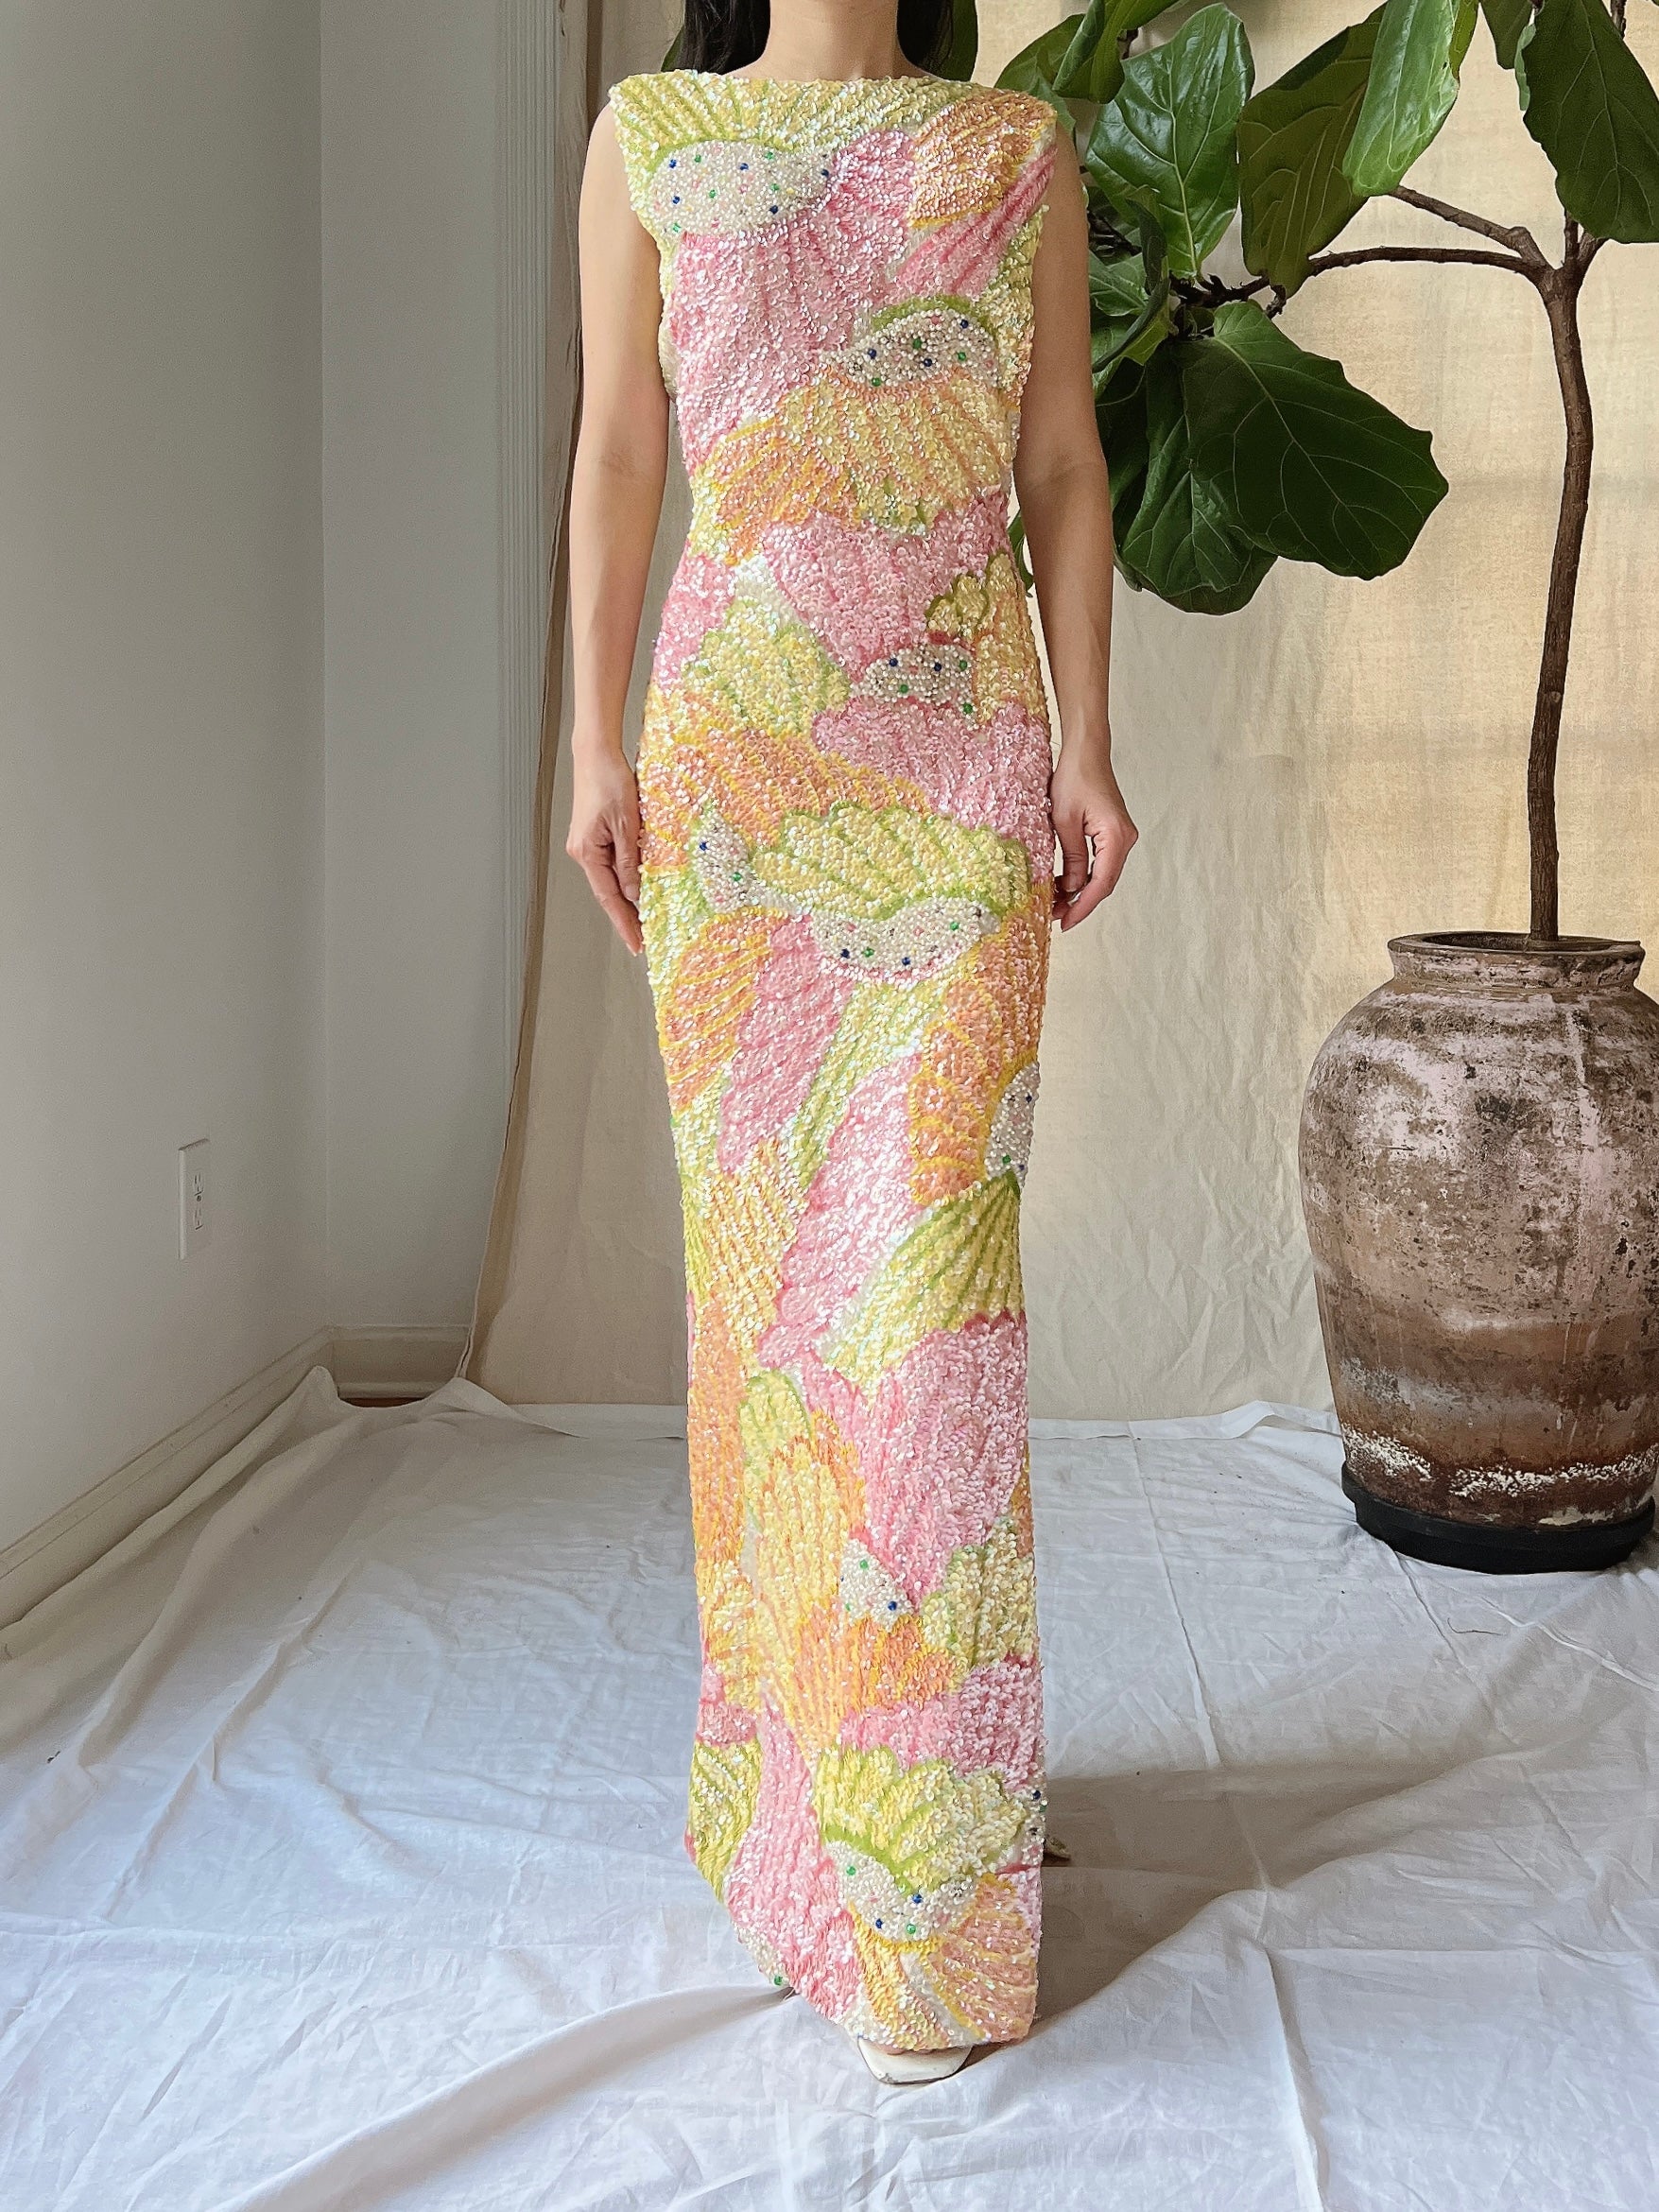 Rare Gene Shelly Beaded Gown - S-M